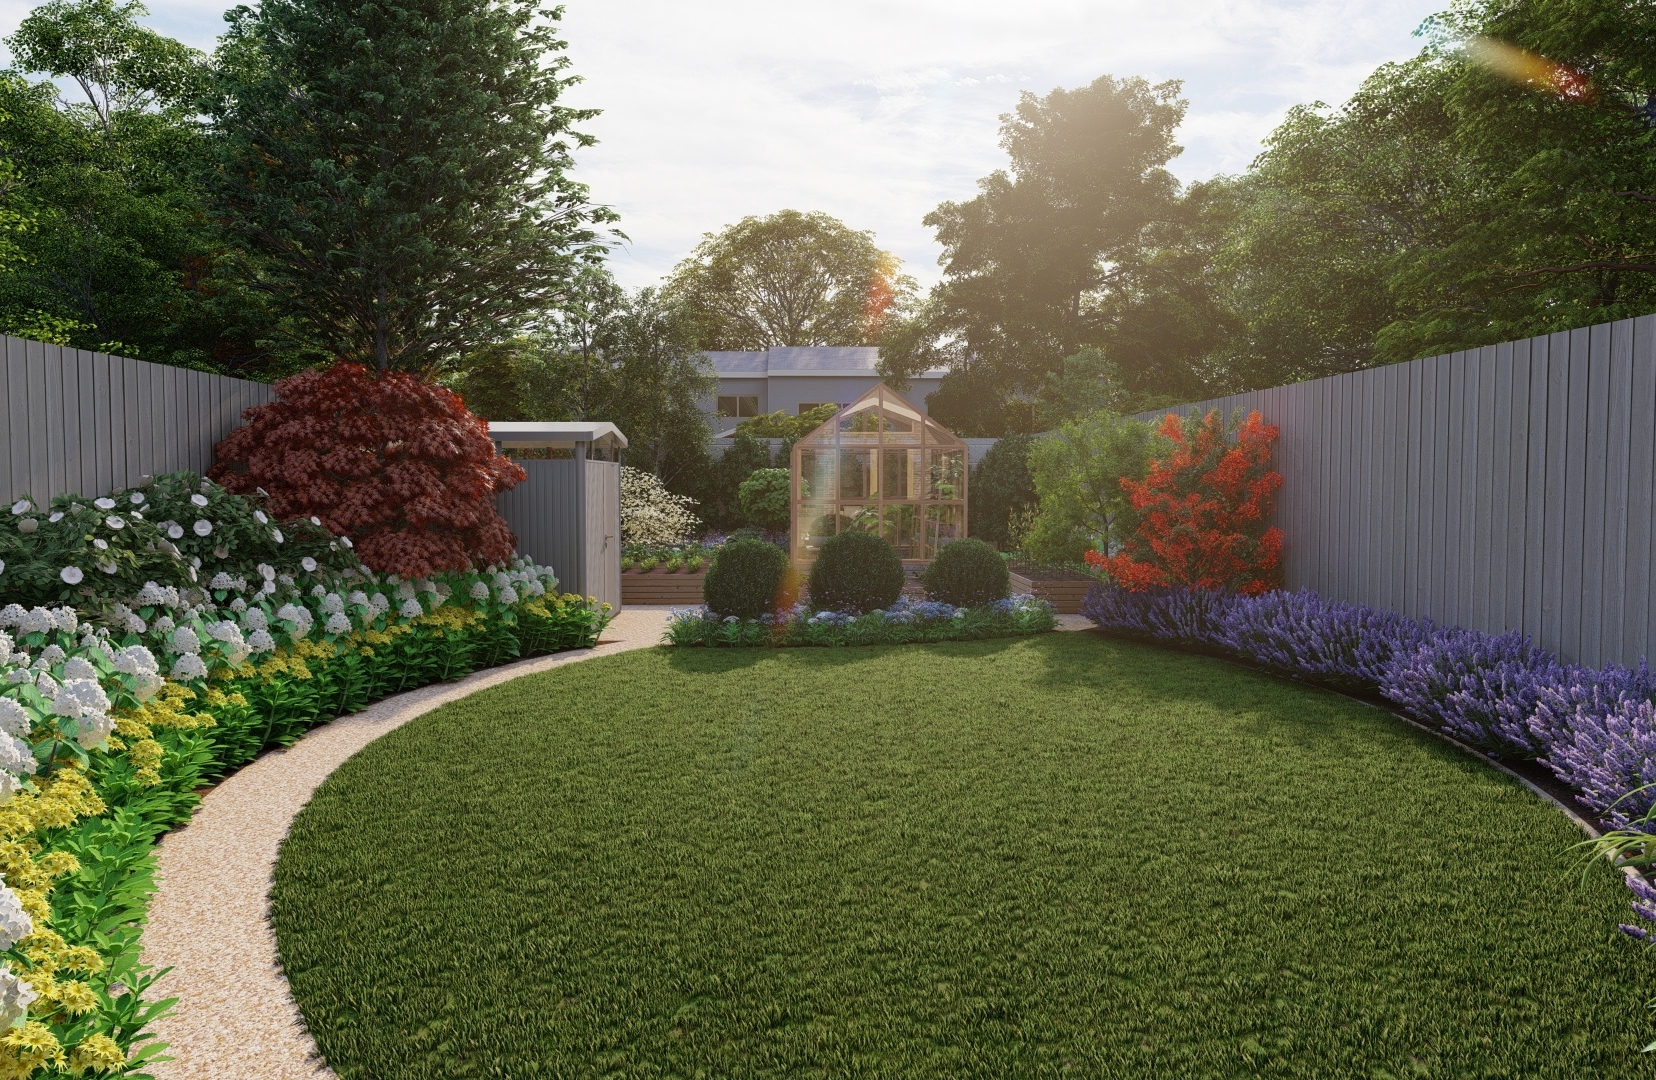 Design Visuals for a large Family Garden in Dundrum, Dublin 18. Design features Gabriel Ash Greenhouse, Growing Beds, Biohort Garden Shed and extensive planted borders.